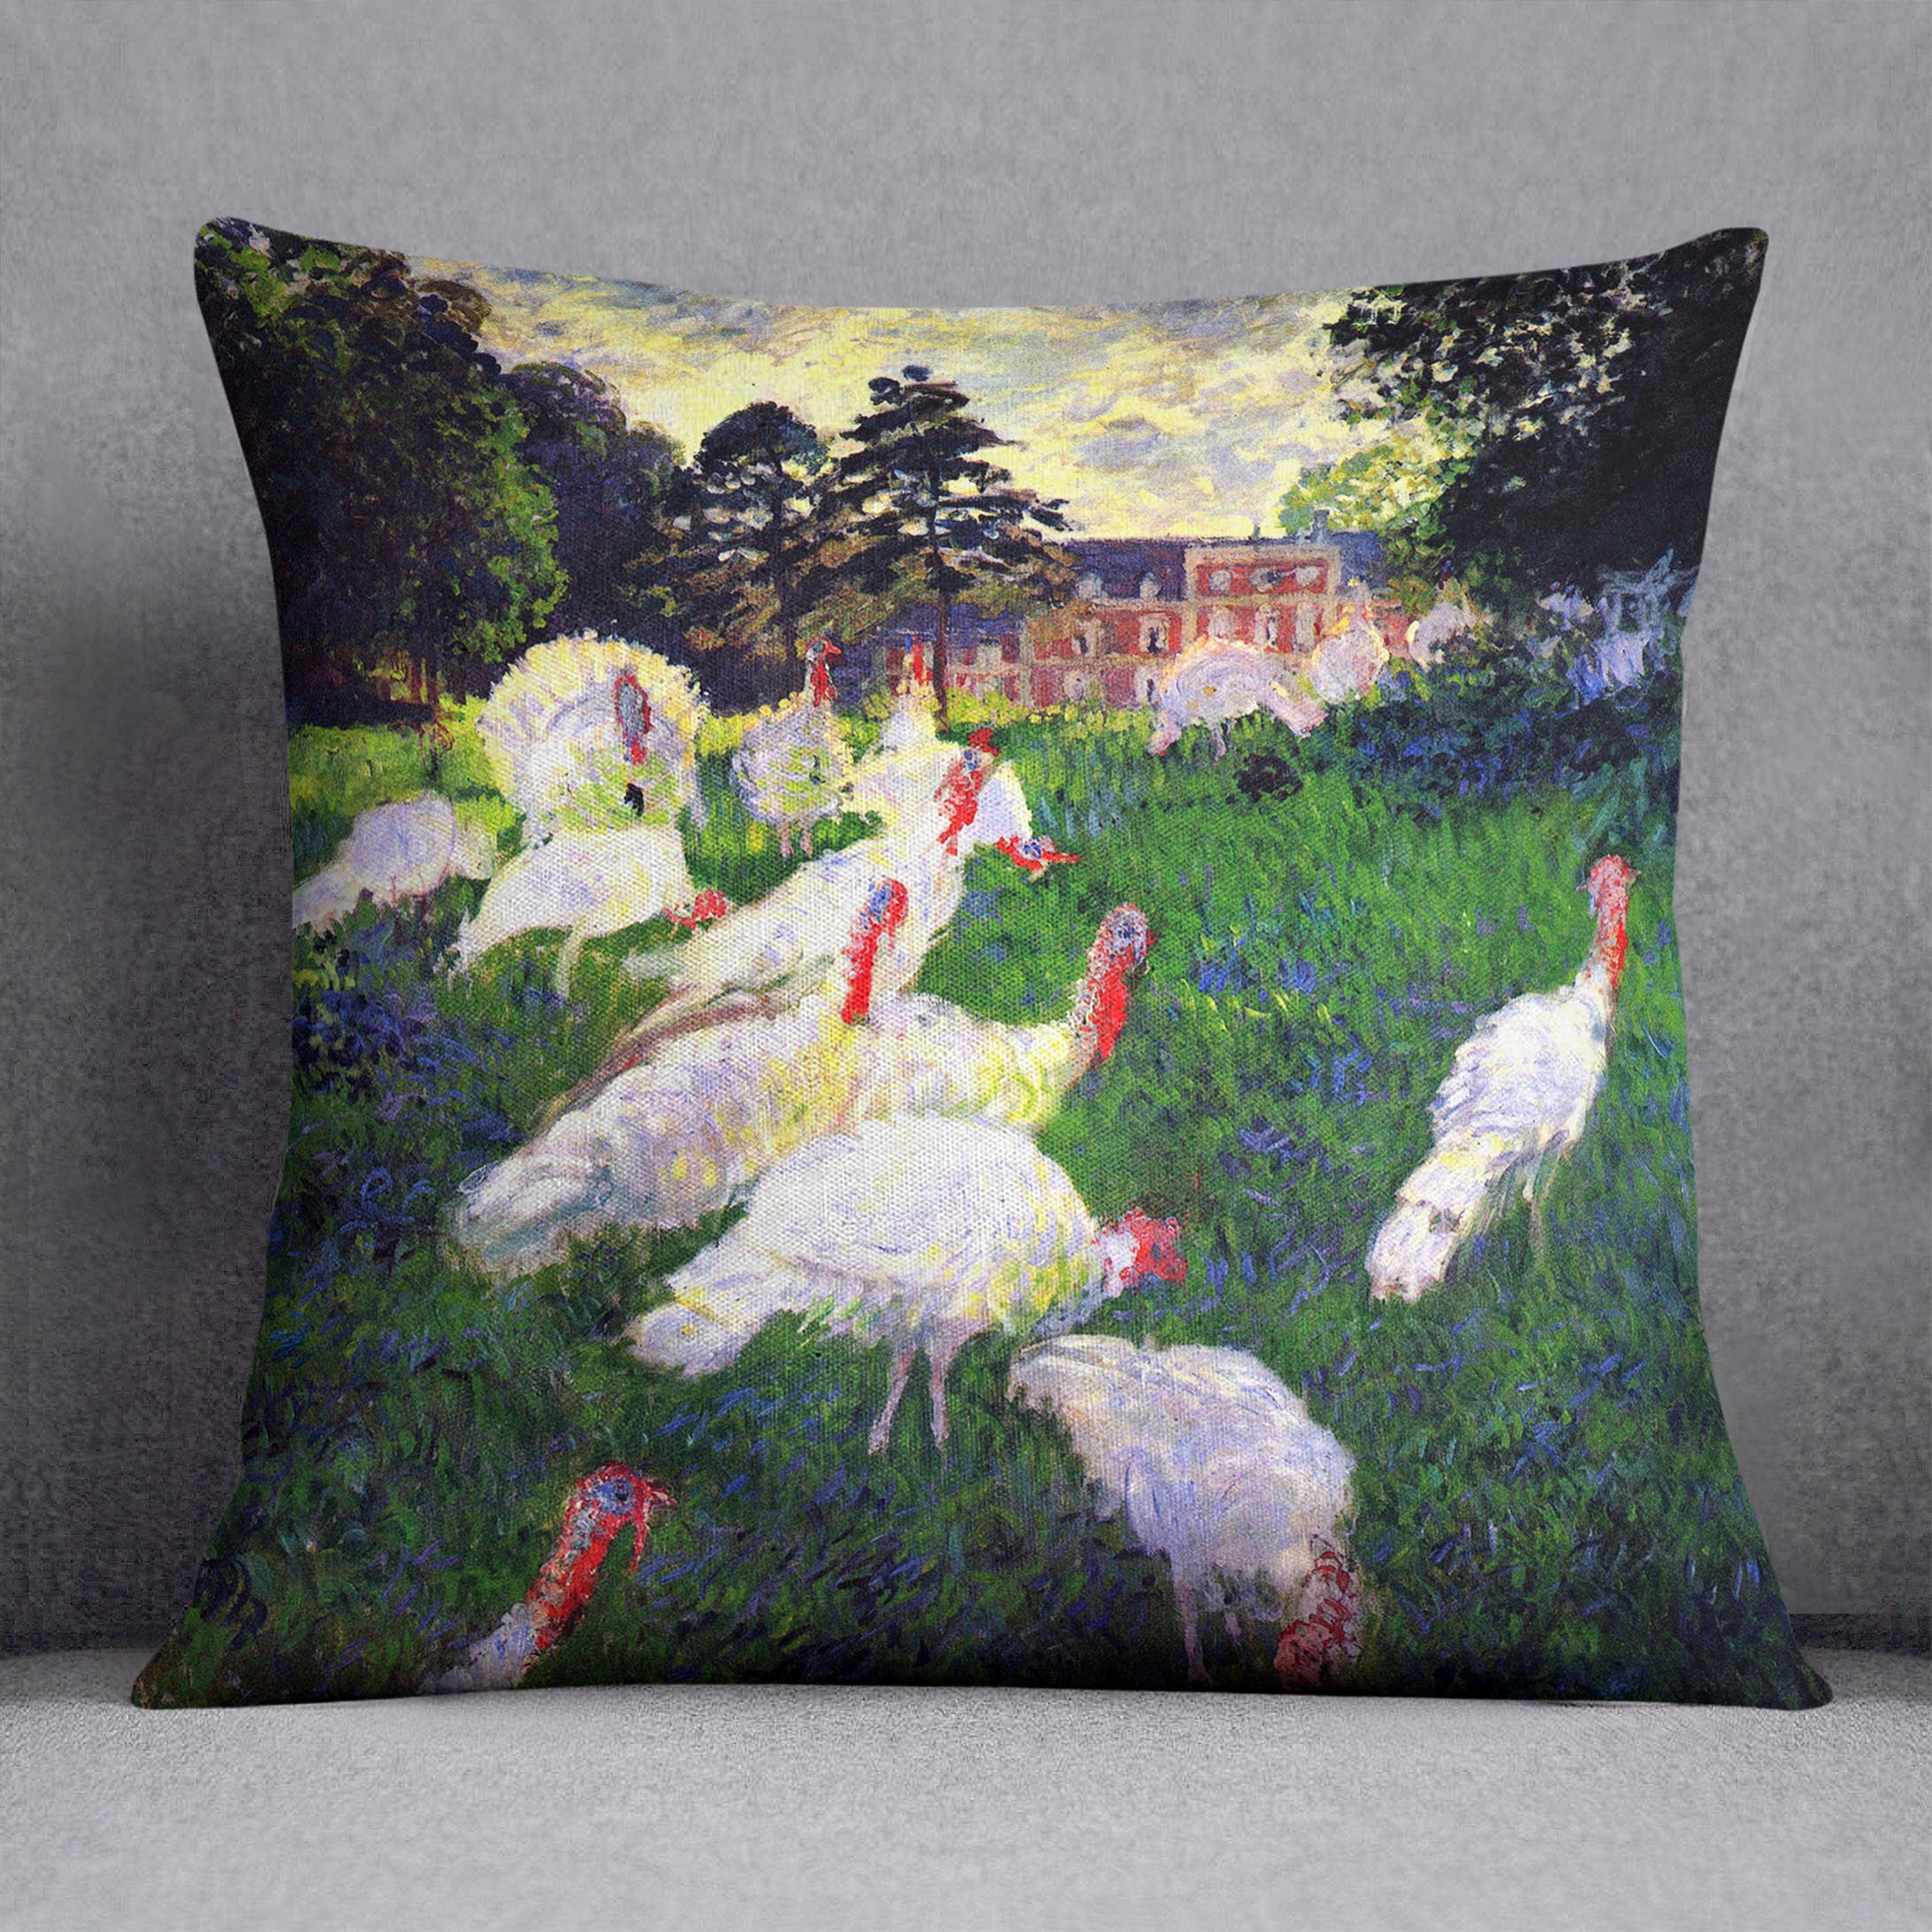 The Gobbler by Monet Cushion